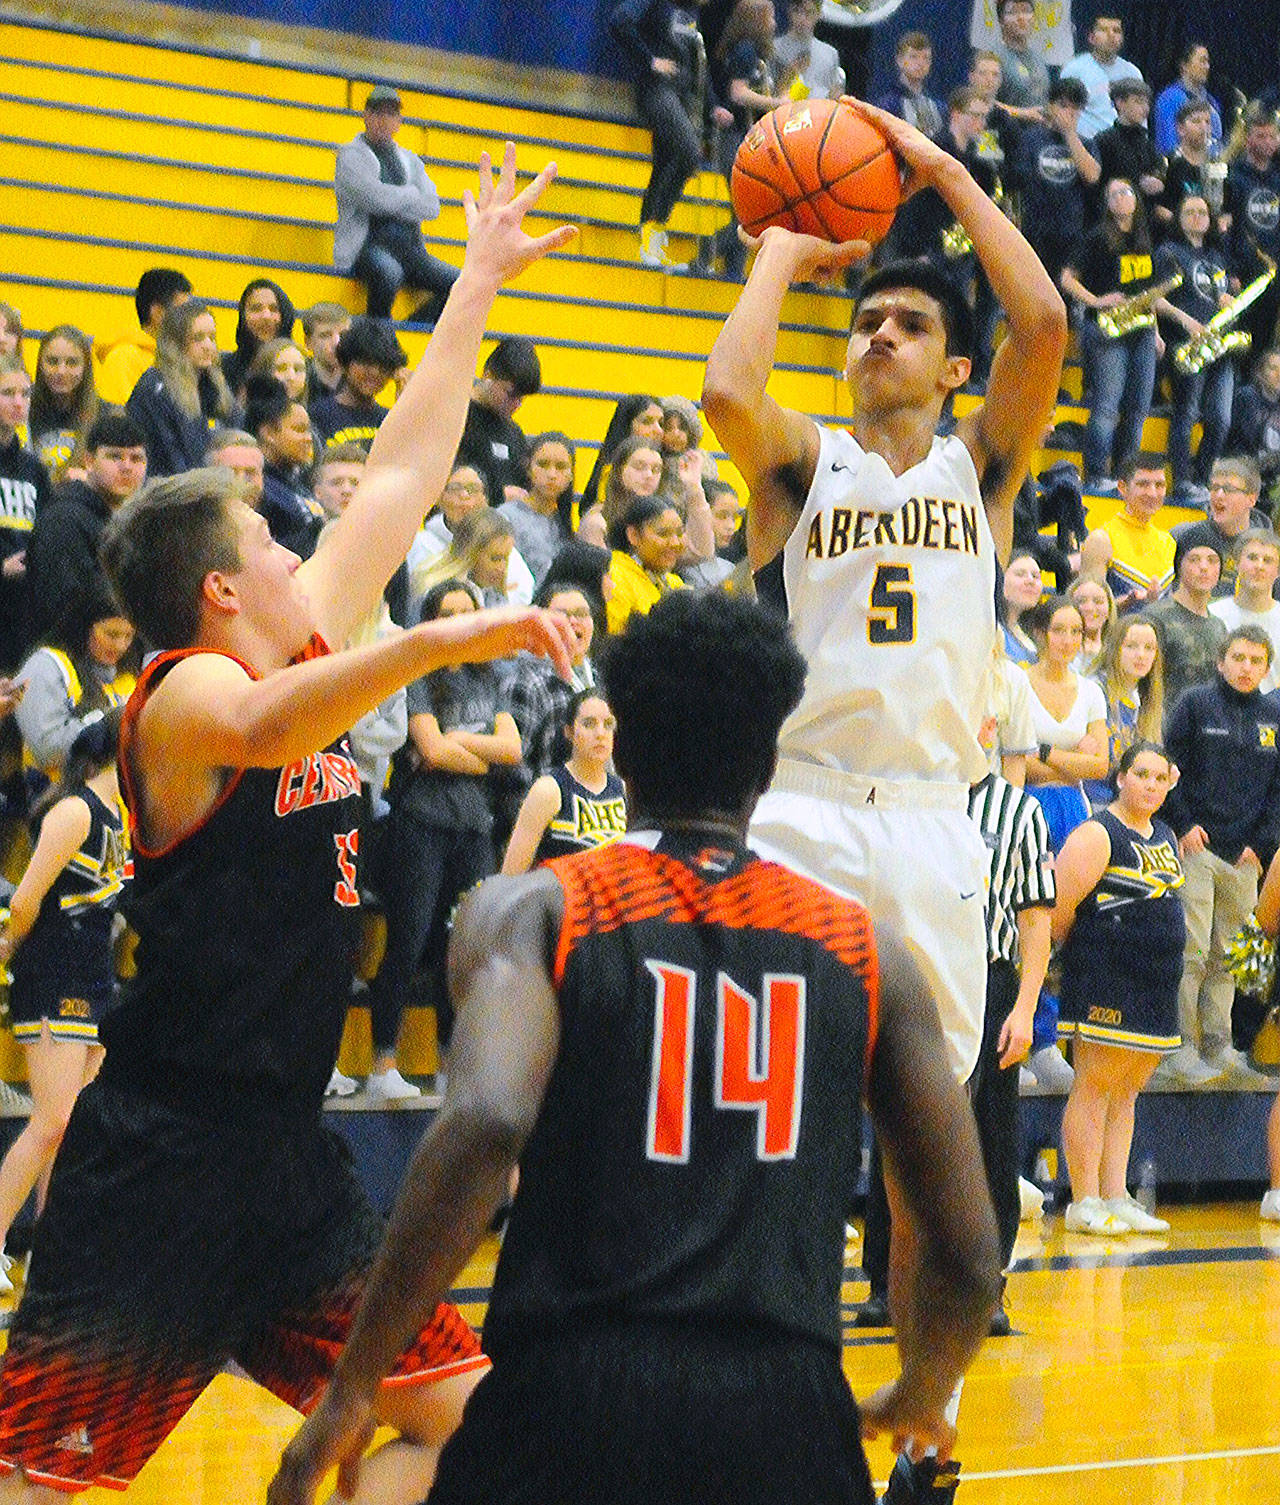 Aberdeen’s Javier Bojorge (5) pulls up for a mid-range jumper in the first quarter against Centralia on Friday. Bojorge led the Bobcats with 20 points in their 57-54 win over the Tigers. (Hasani Grayson | Grays Harbor News Group)